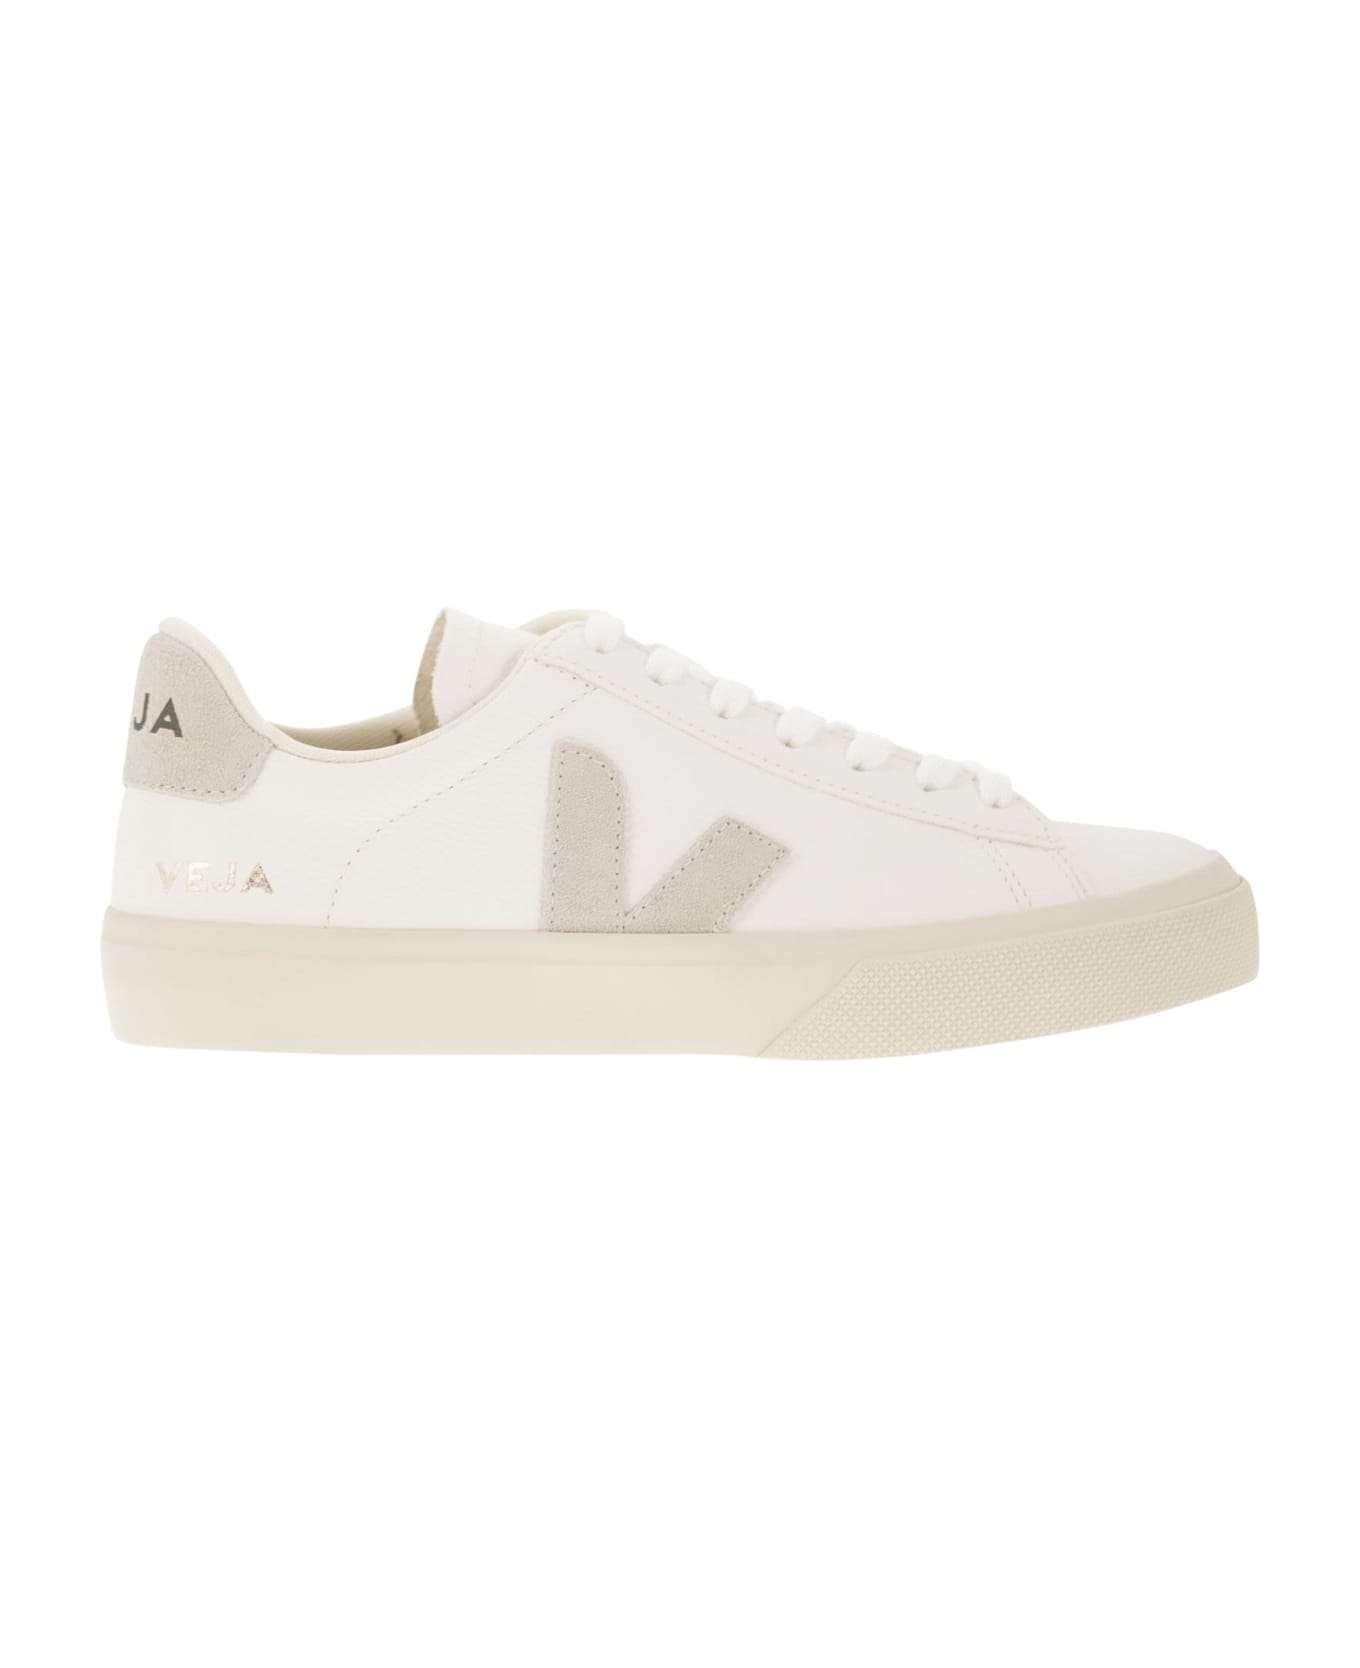 Veja Chromefree Leather Trainers - White/natural